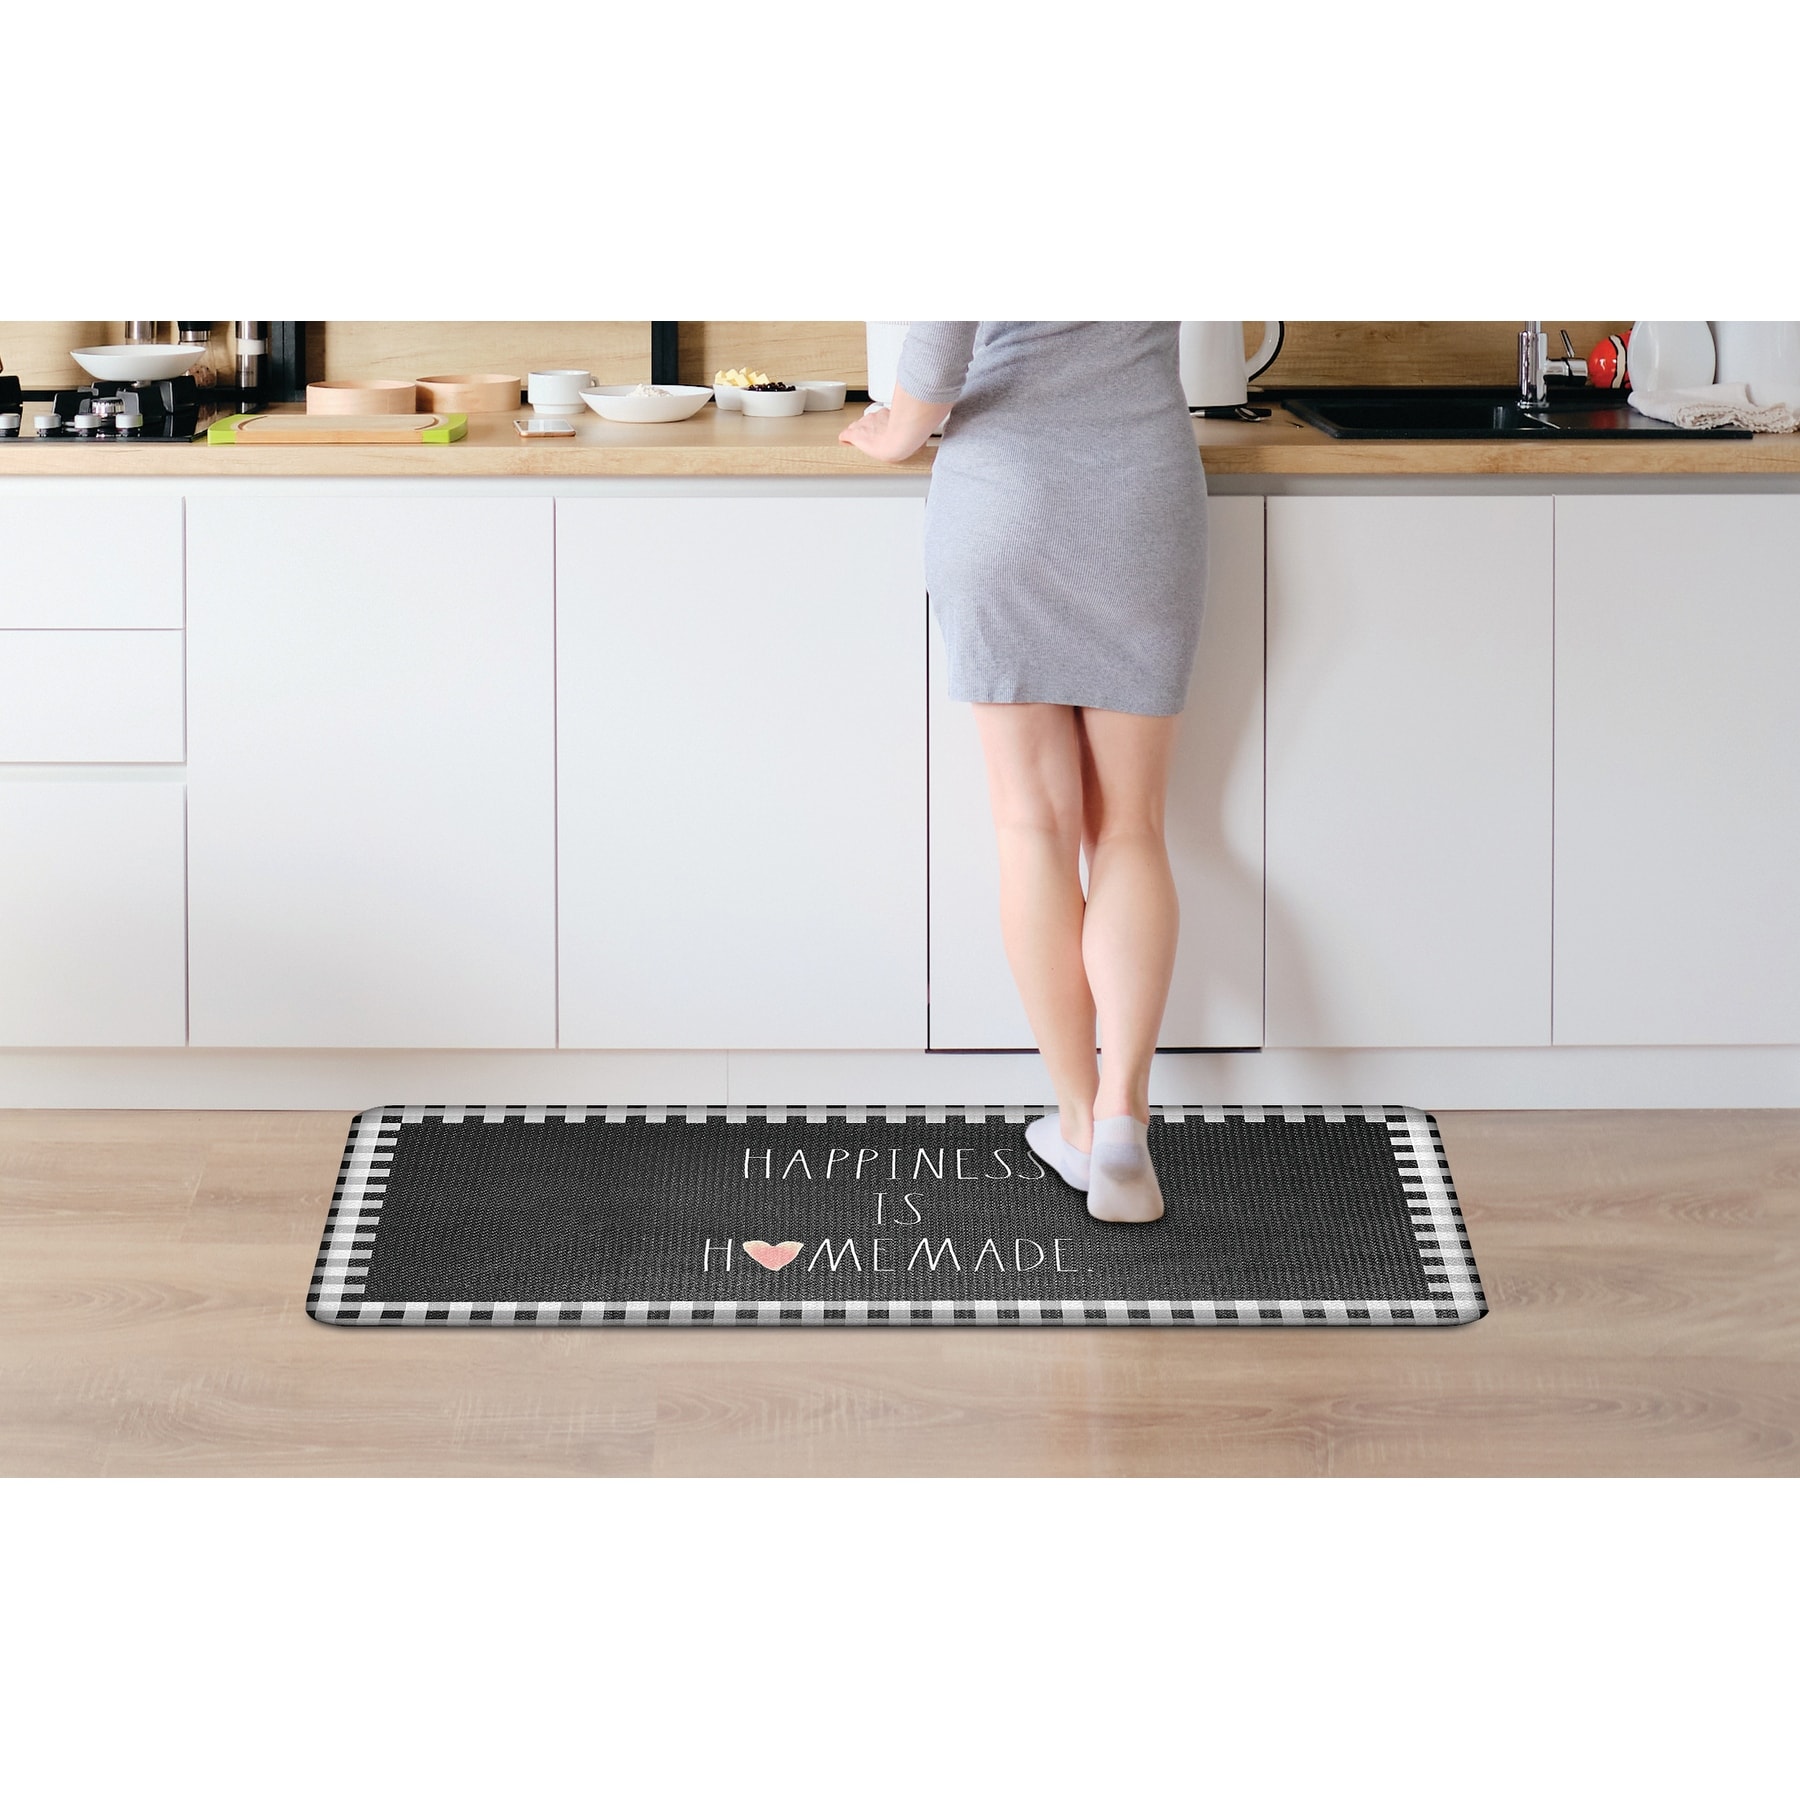 https://ak1.ostkcdn.com/images/products/is/images/direct/b35b84ce6a2f5c6f4fde1a98392dfefaf673404c/Rae-Dunn-Anti-Fatigue-Kitchen-Mat---20%22-x-39%22.jpg